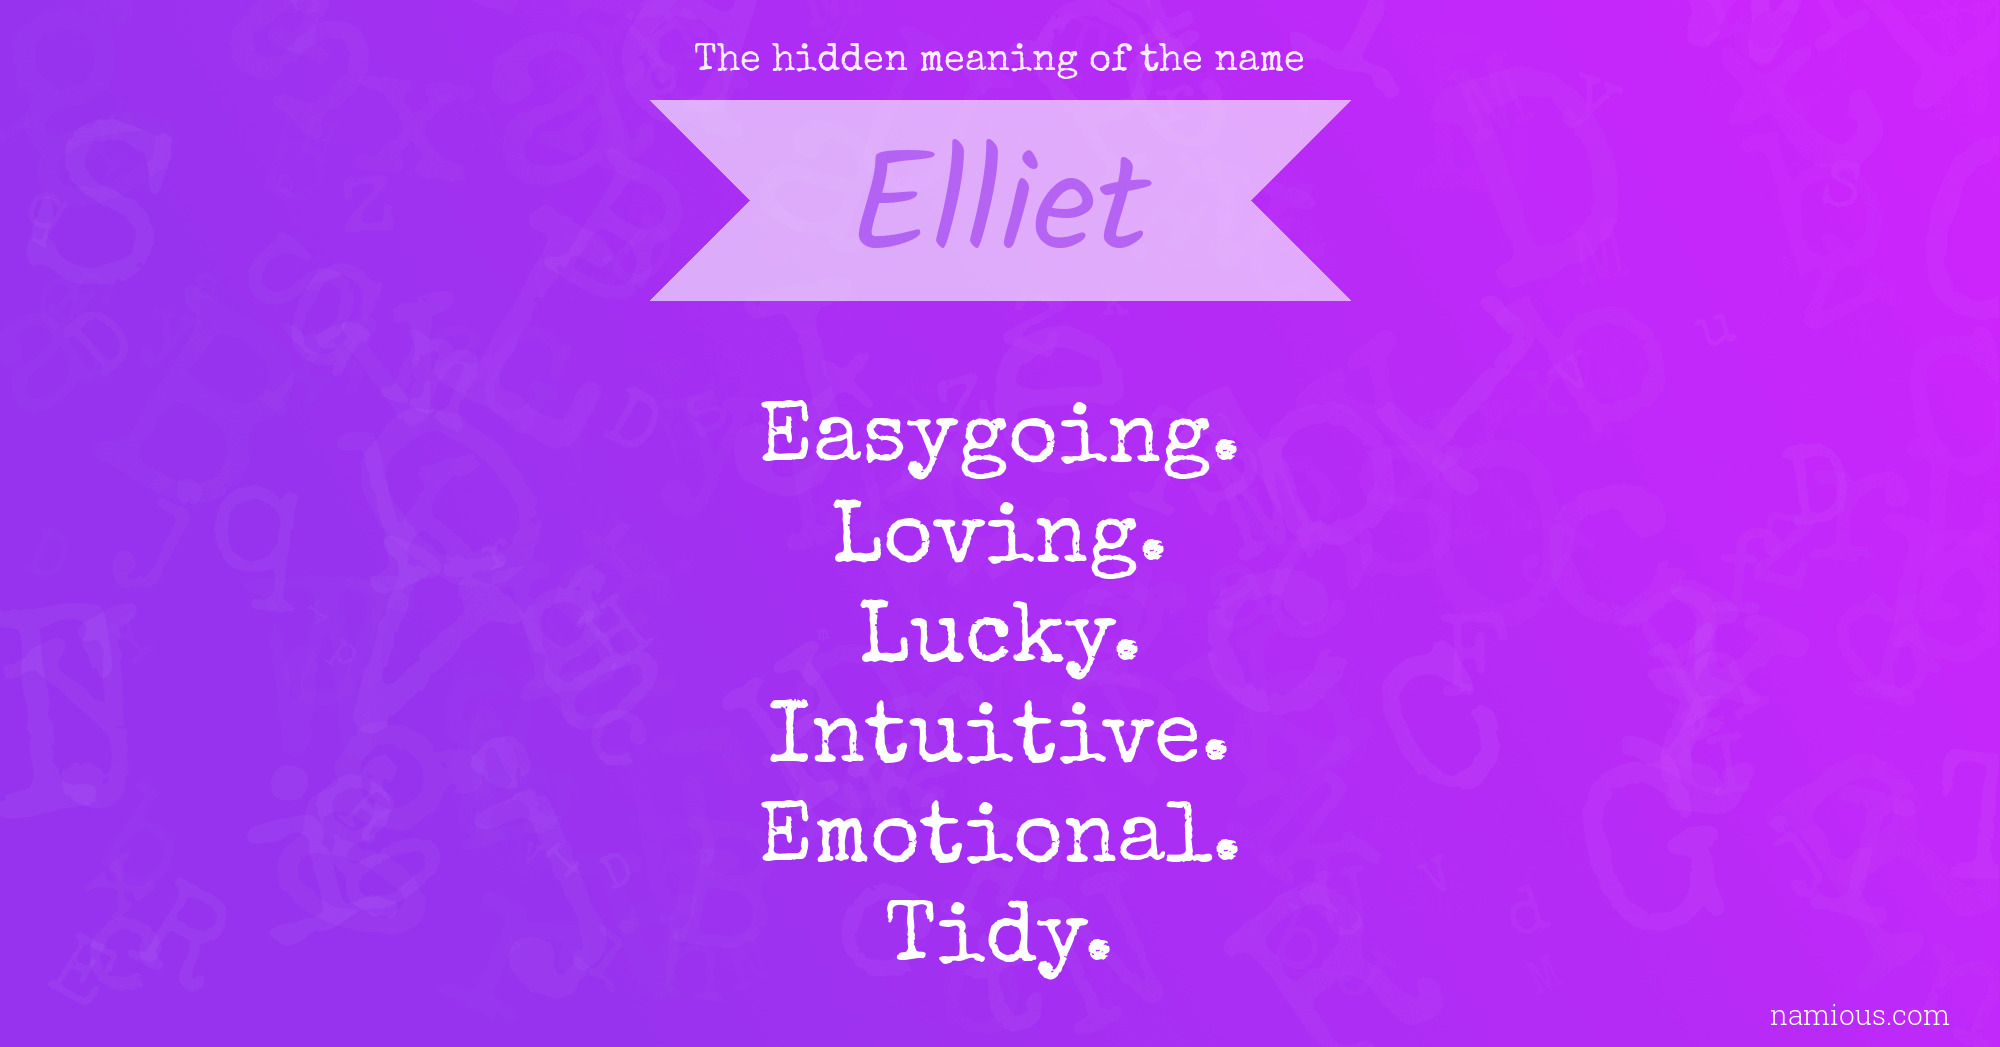 The hidden meaning of the name Elliet